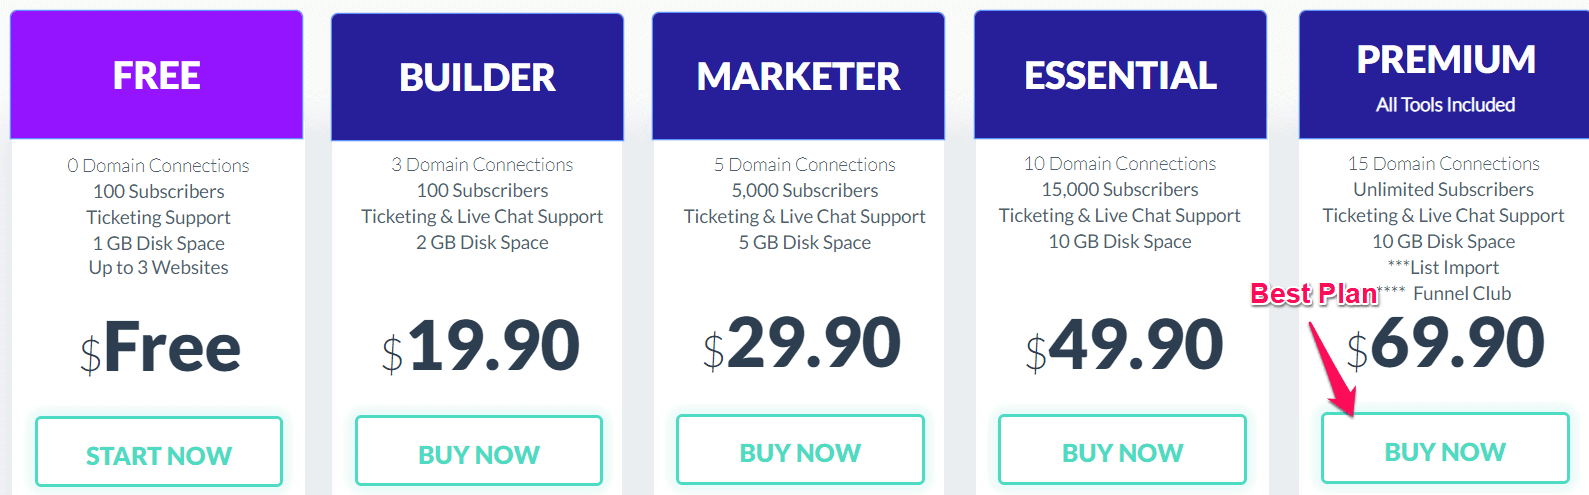 Builderall pricing plans